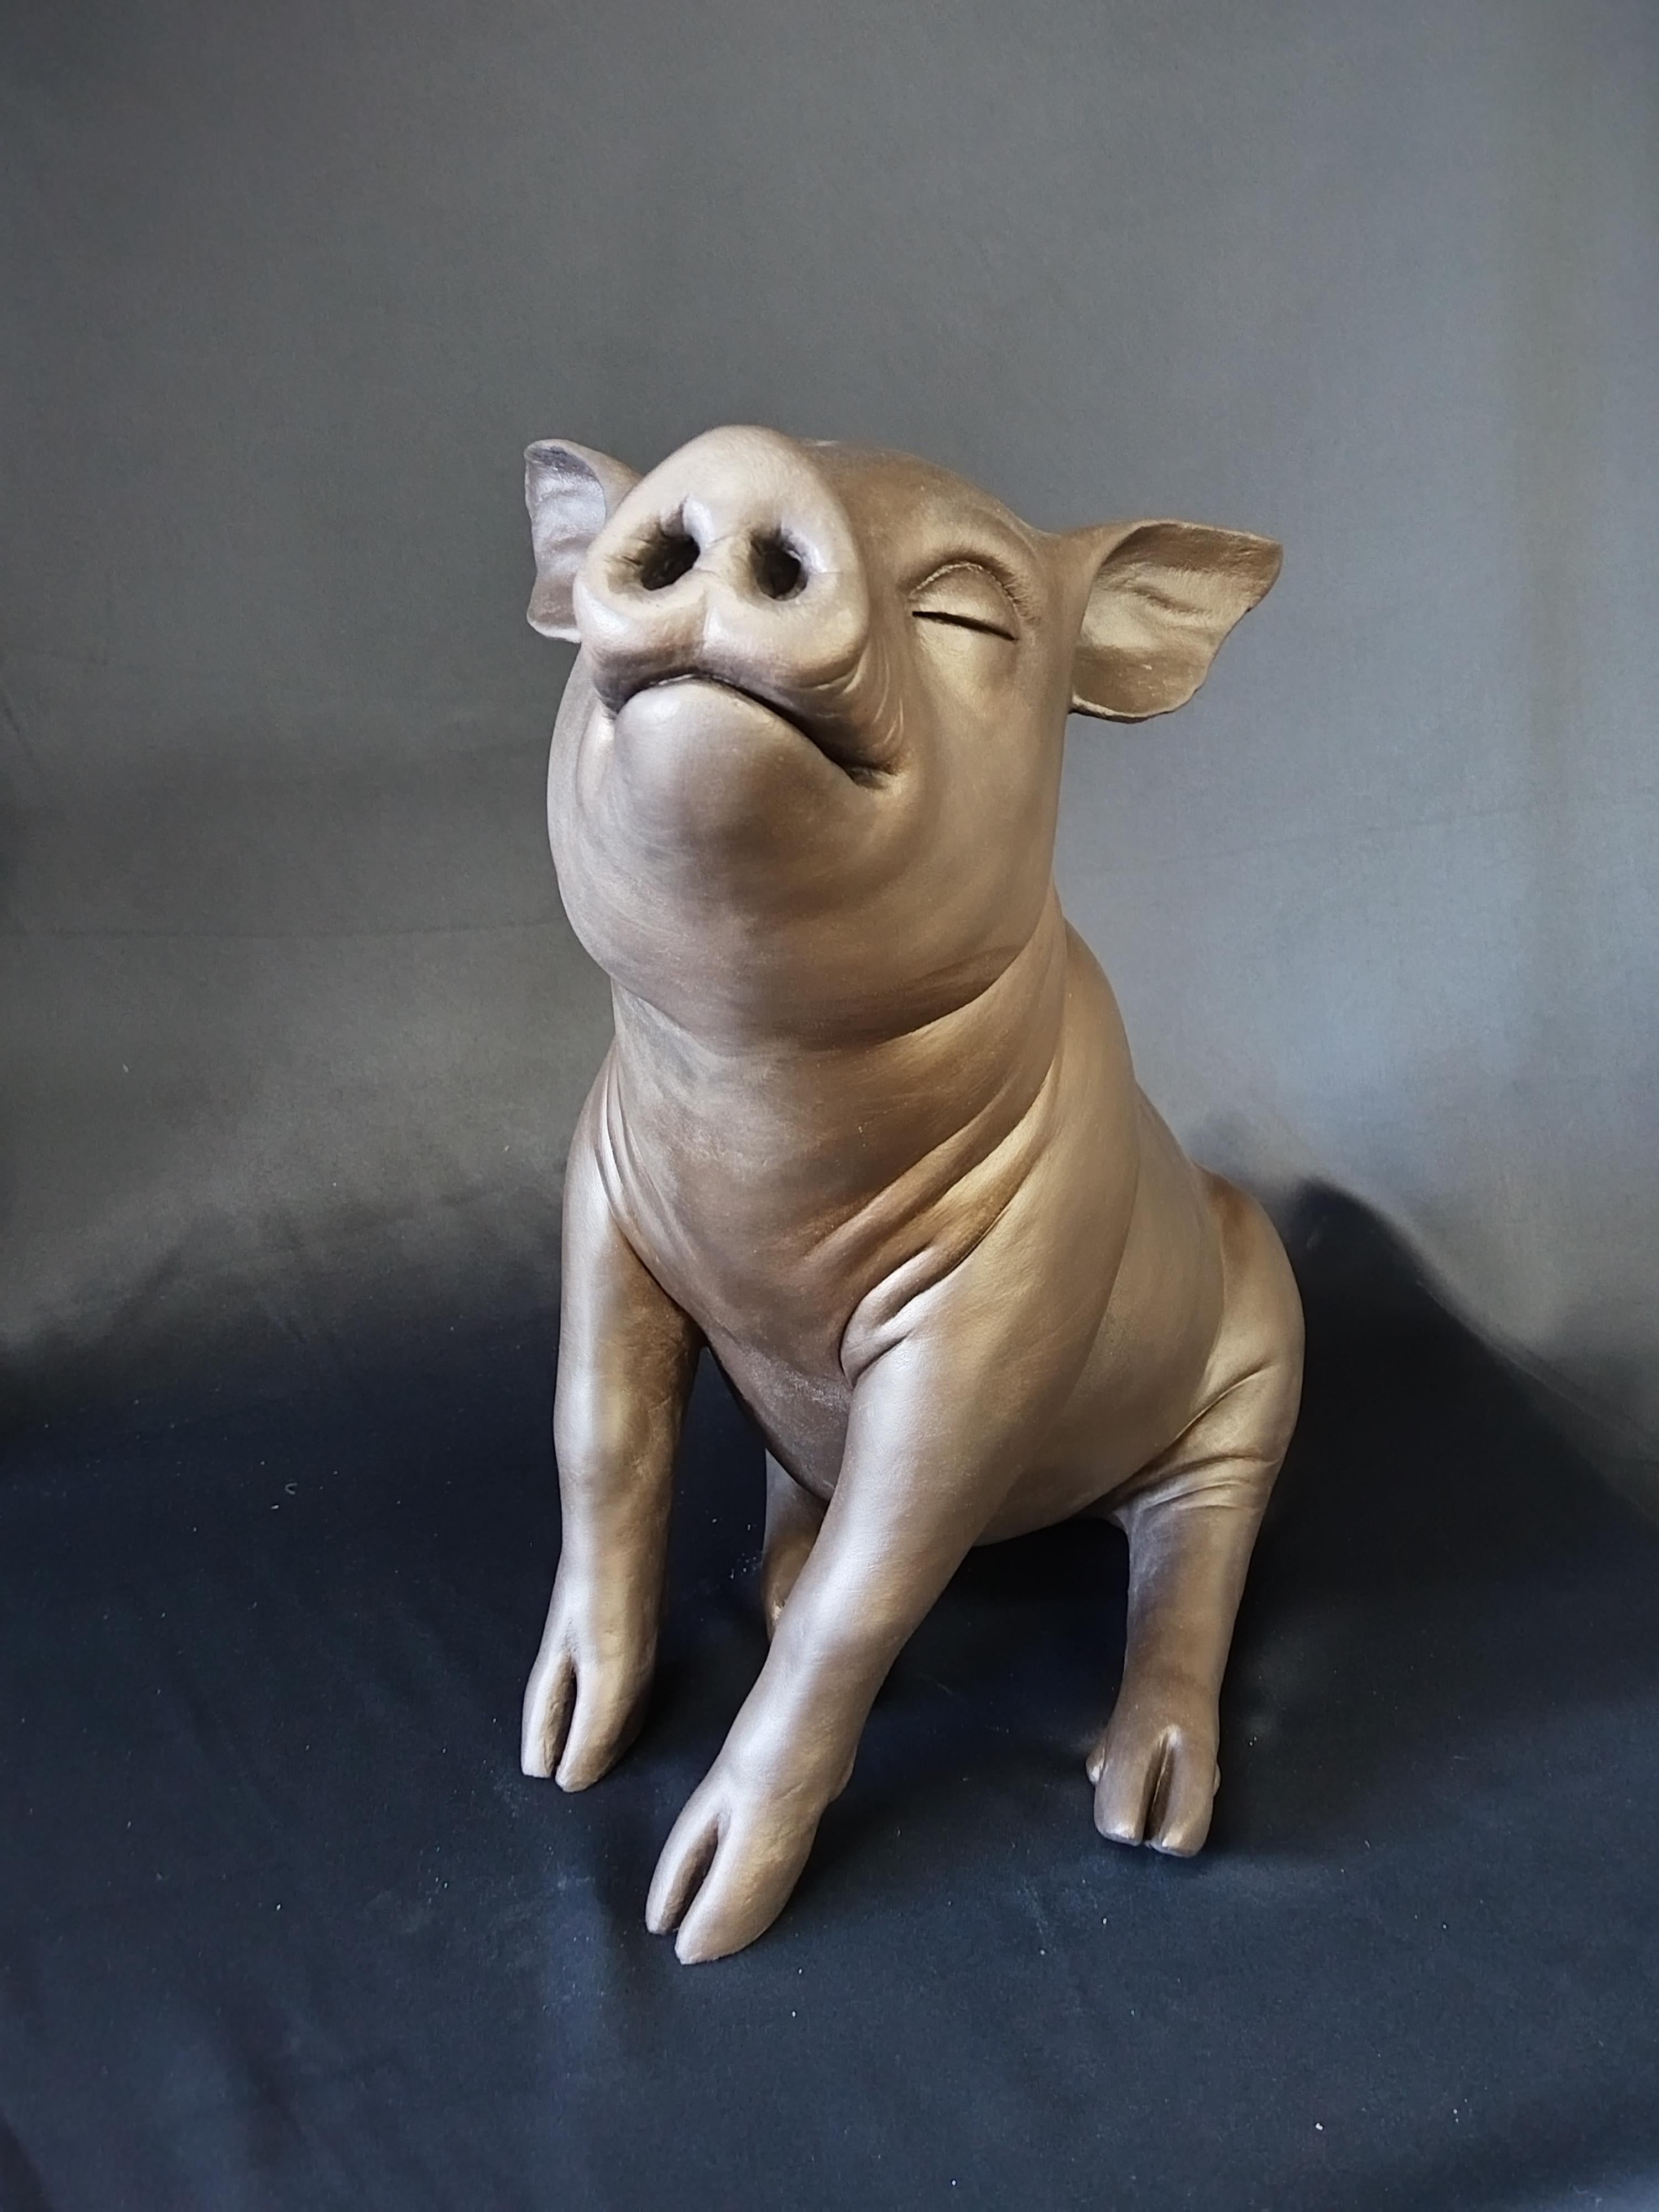 A medium sized, limited edition bronze piglet sculpture. Edition of 8.

This is a cute, adorable bronze statement piece that looks appealing from all sides. The sculpture can be customized with different patinas on request. A waiting period of two